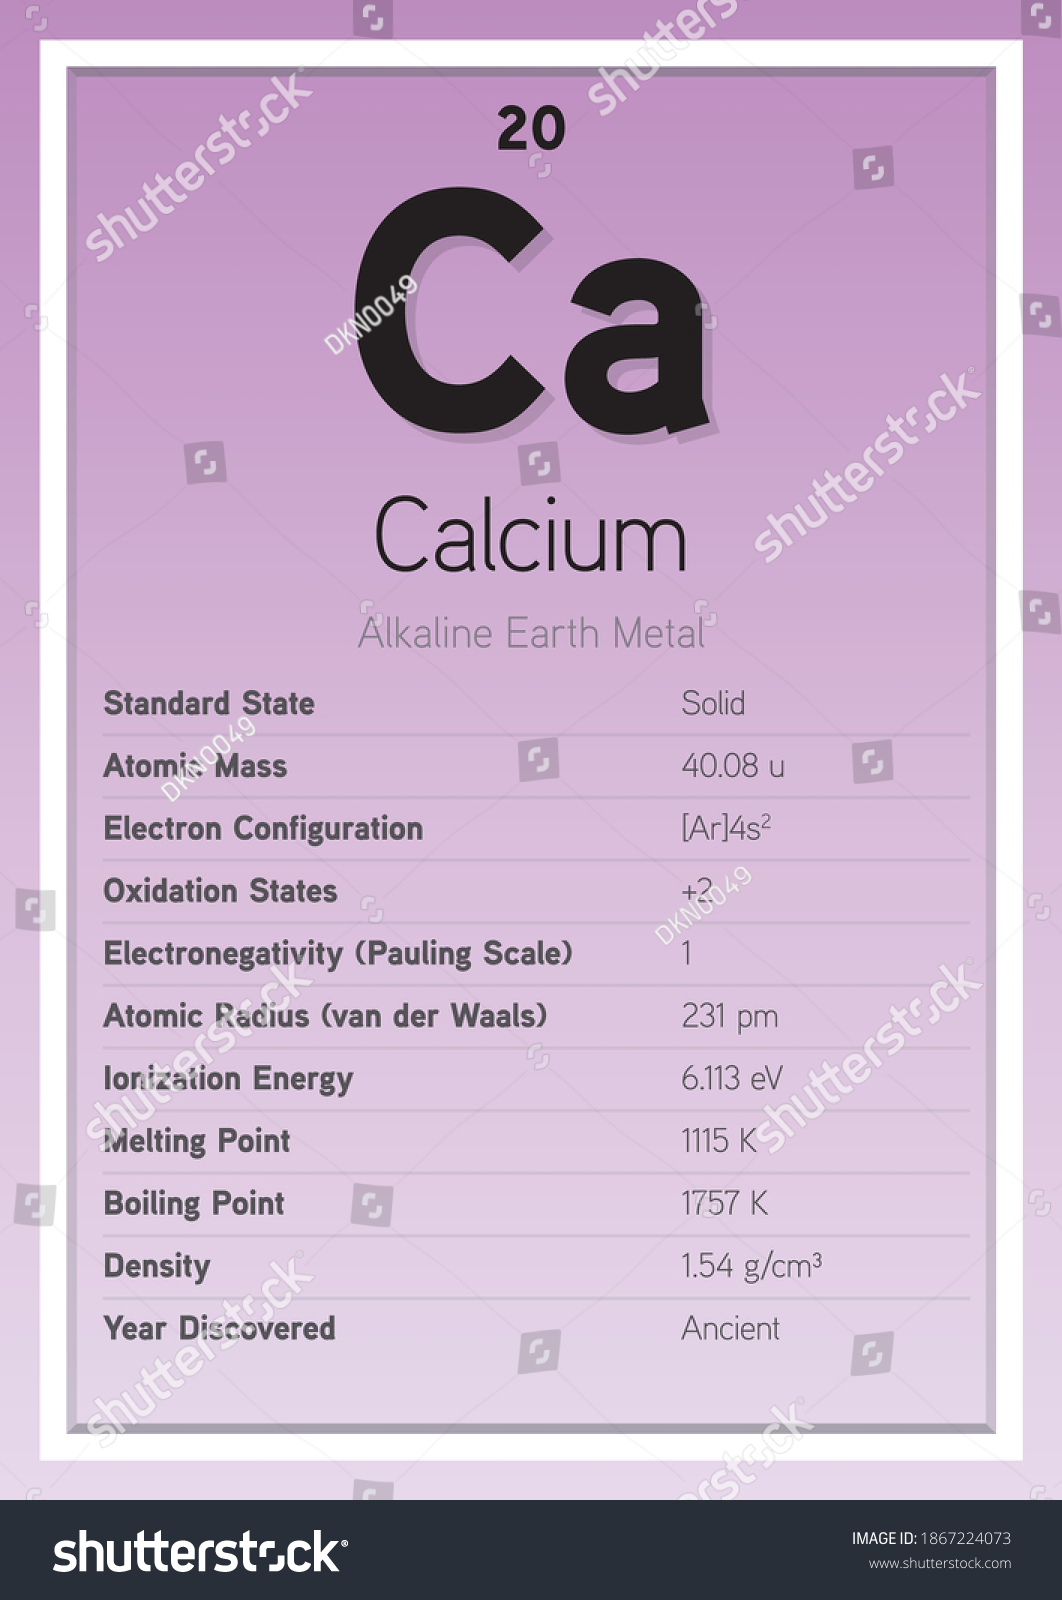 Calcium Periodic Table Elements Info Card Royalty Free Stock Vector 1867224073 4094